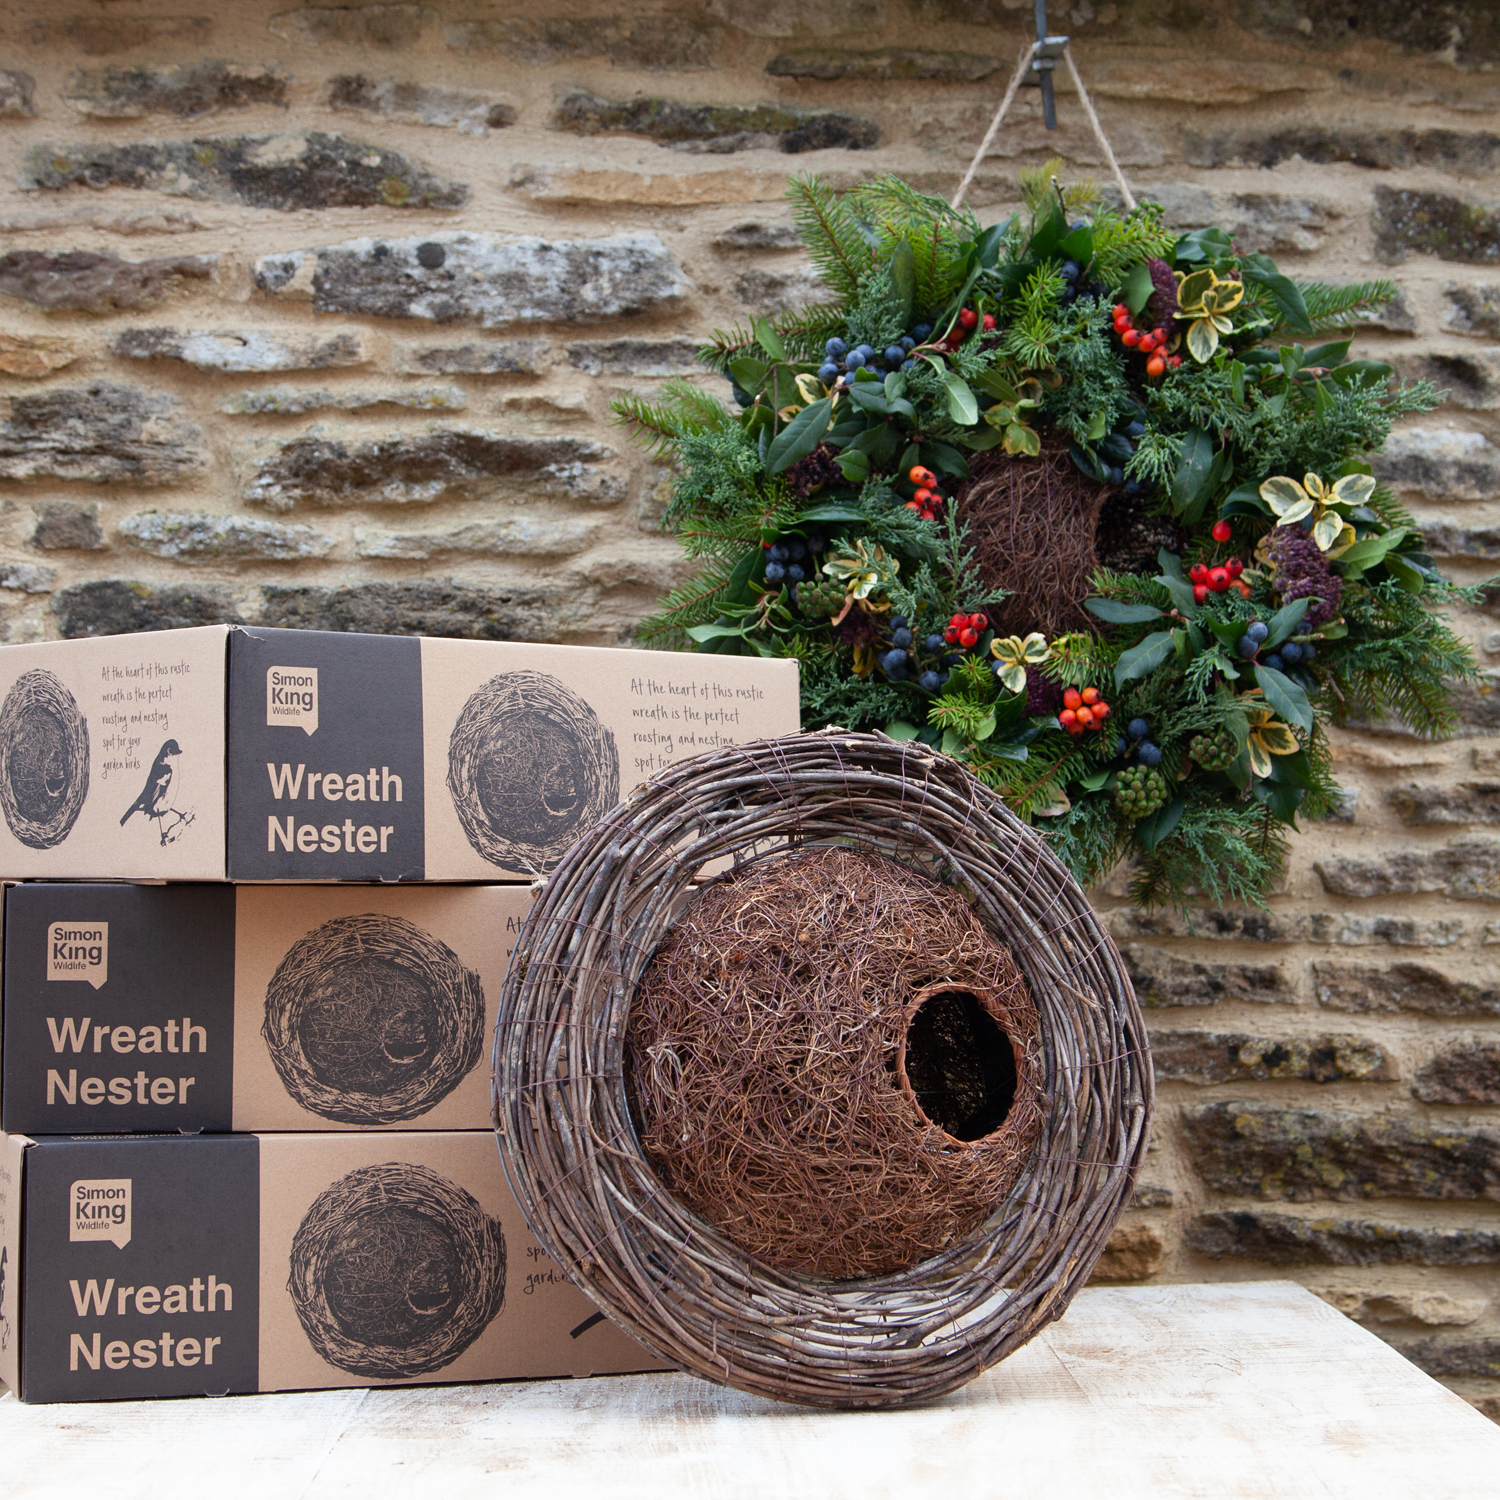 round brush wood wreath base wrapped around a ball shaped concealed bird nester. Displayed on an outside garden table with stacked cardboard boxes showing bird nester wreath